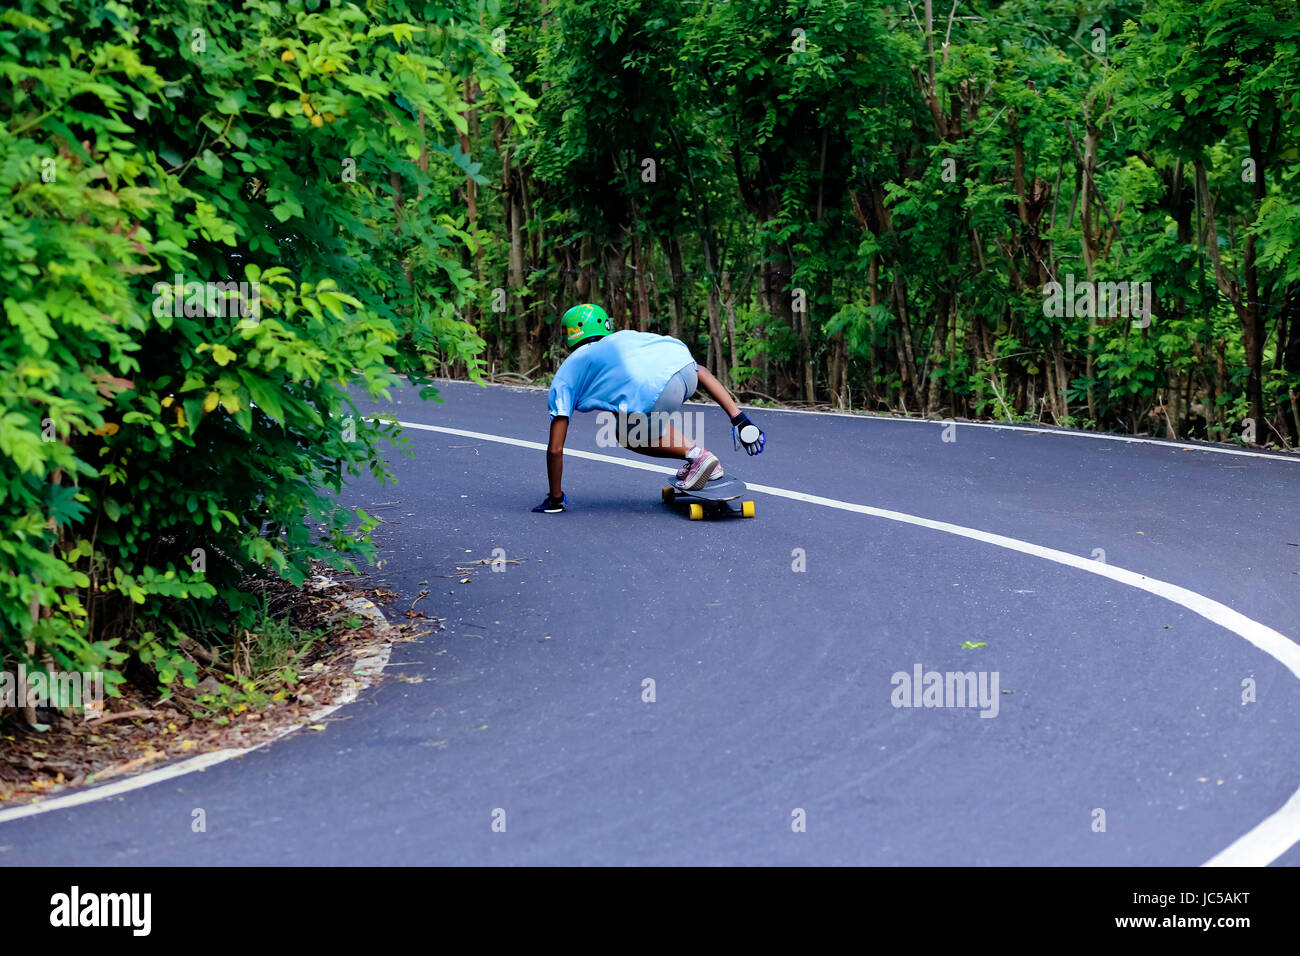 Longboarder staying low going around curve Stock Photo